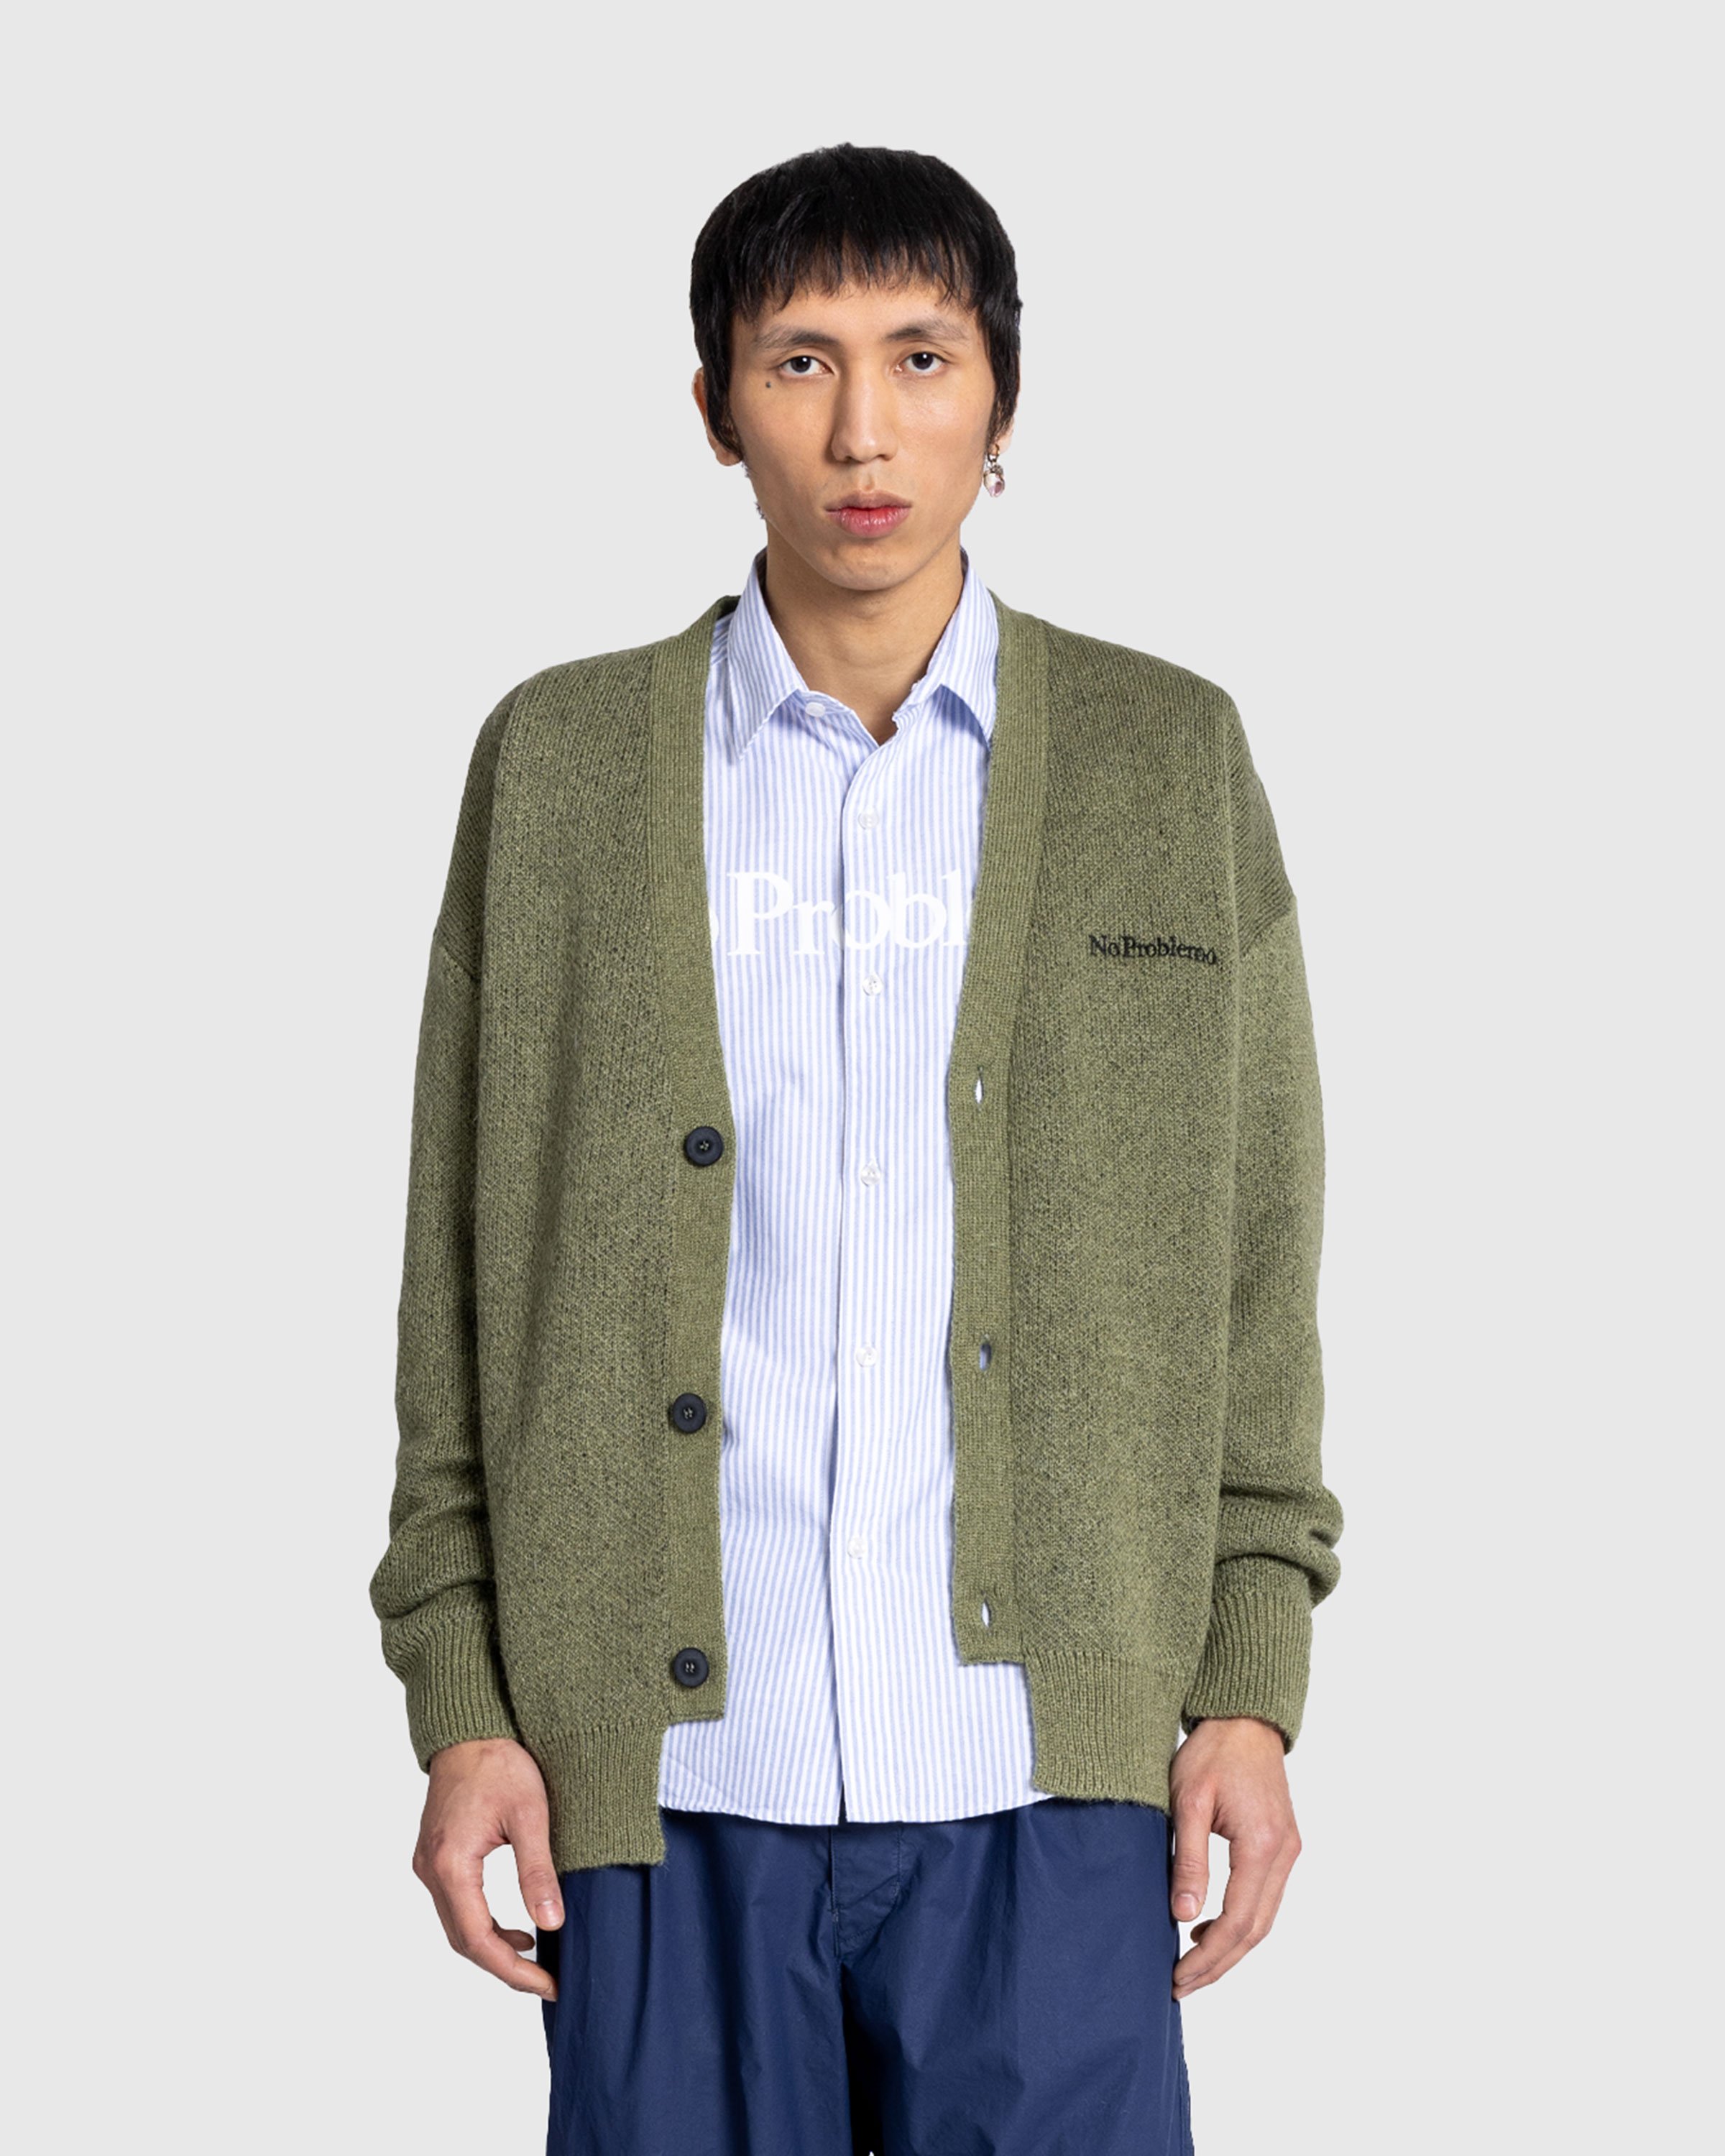 Aries - No Problemo Brushed Mohair Cardigan Black/Olive - Clothing - Green - Image 2